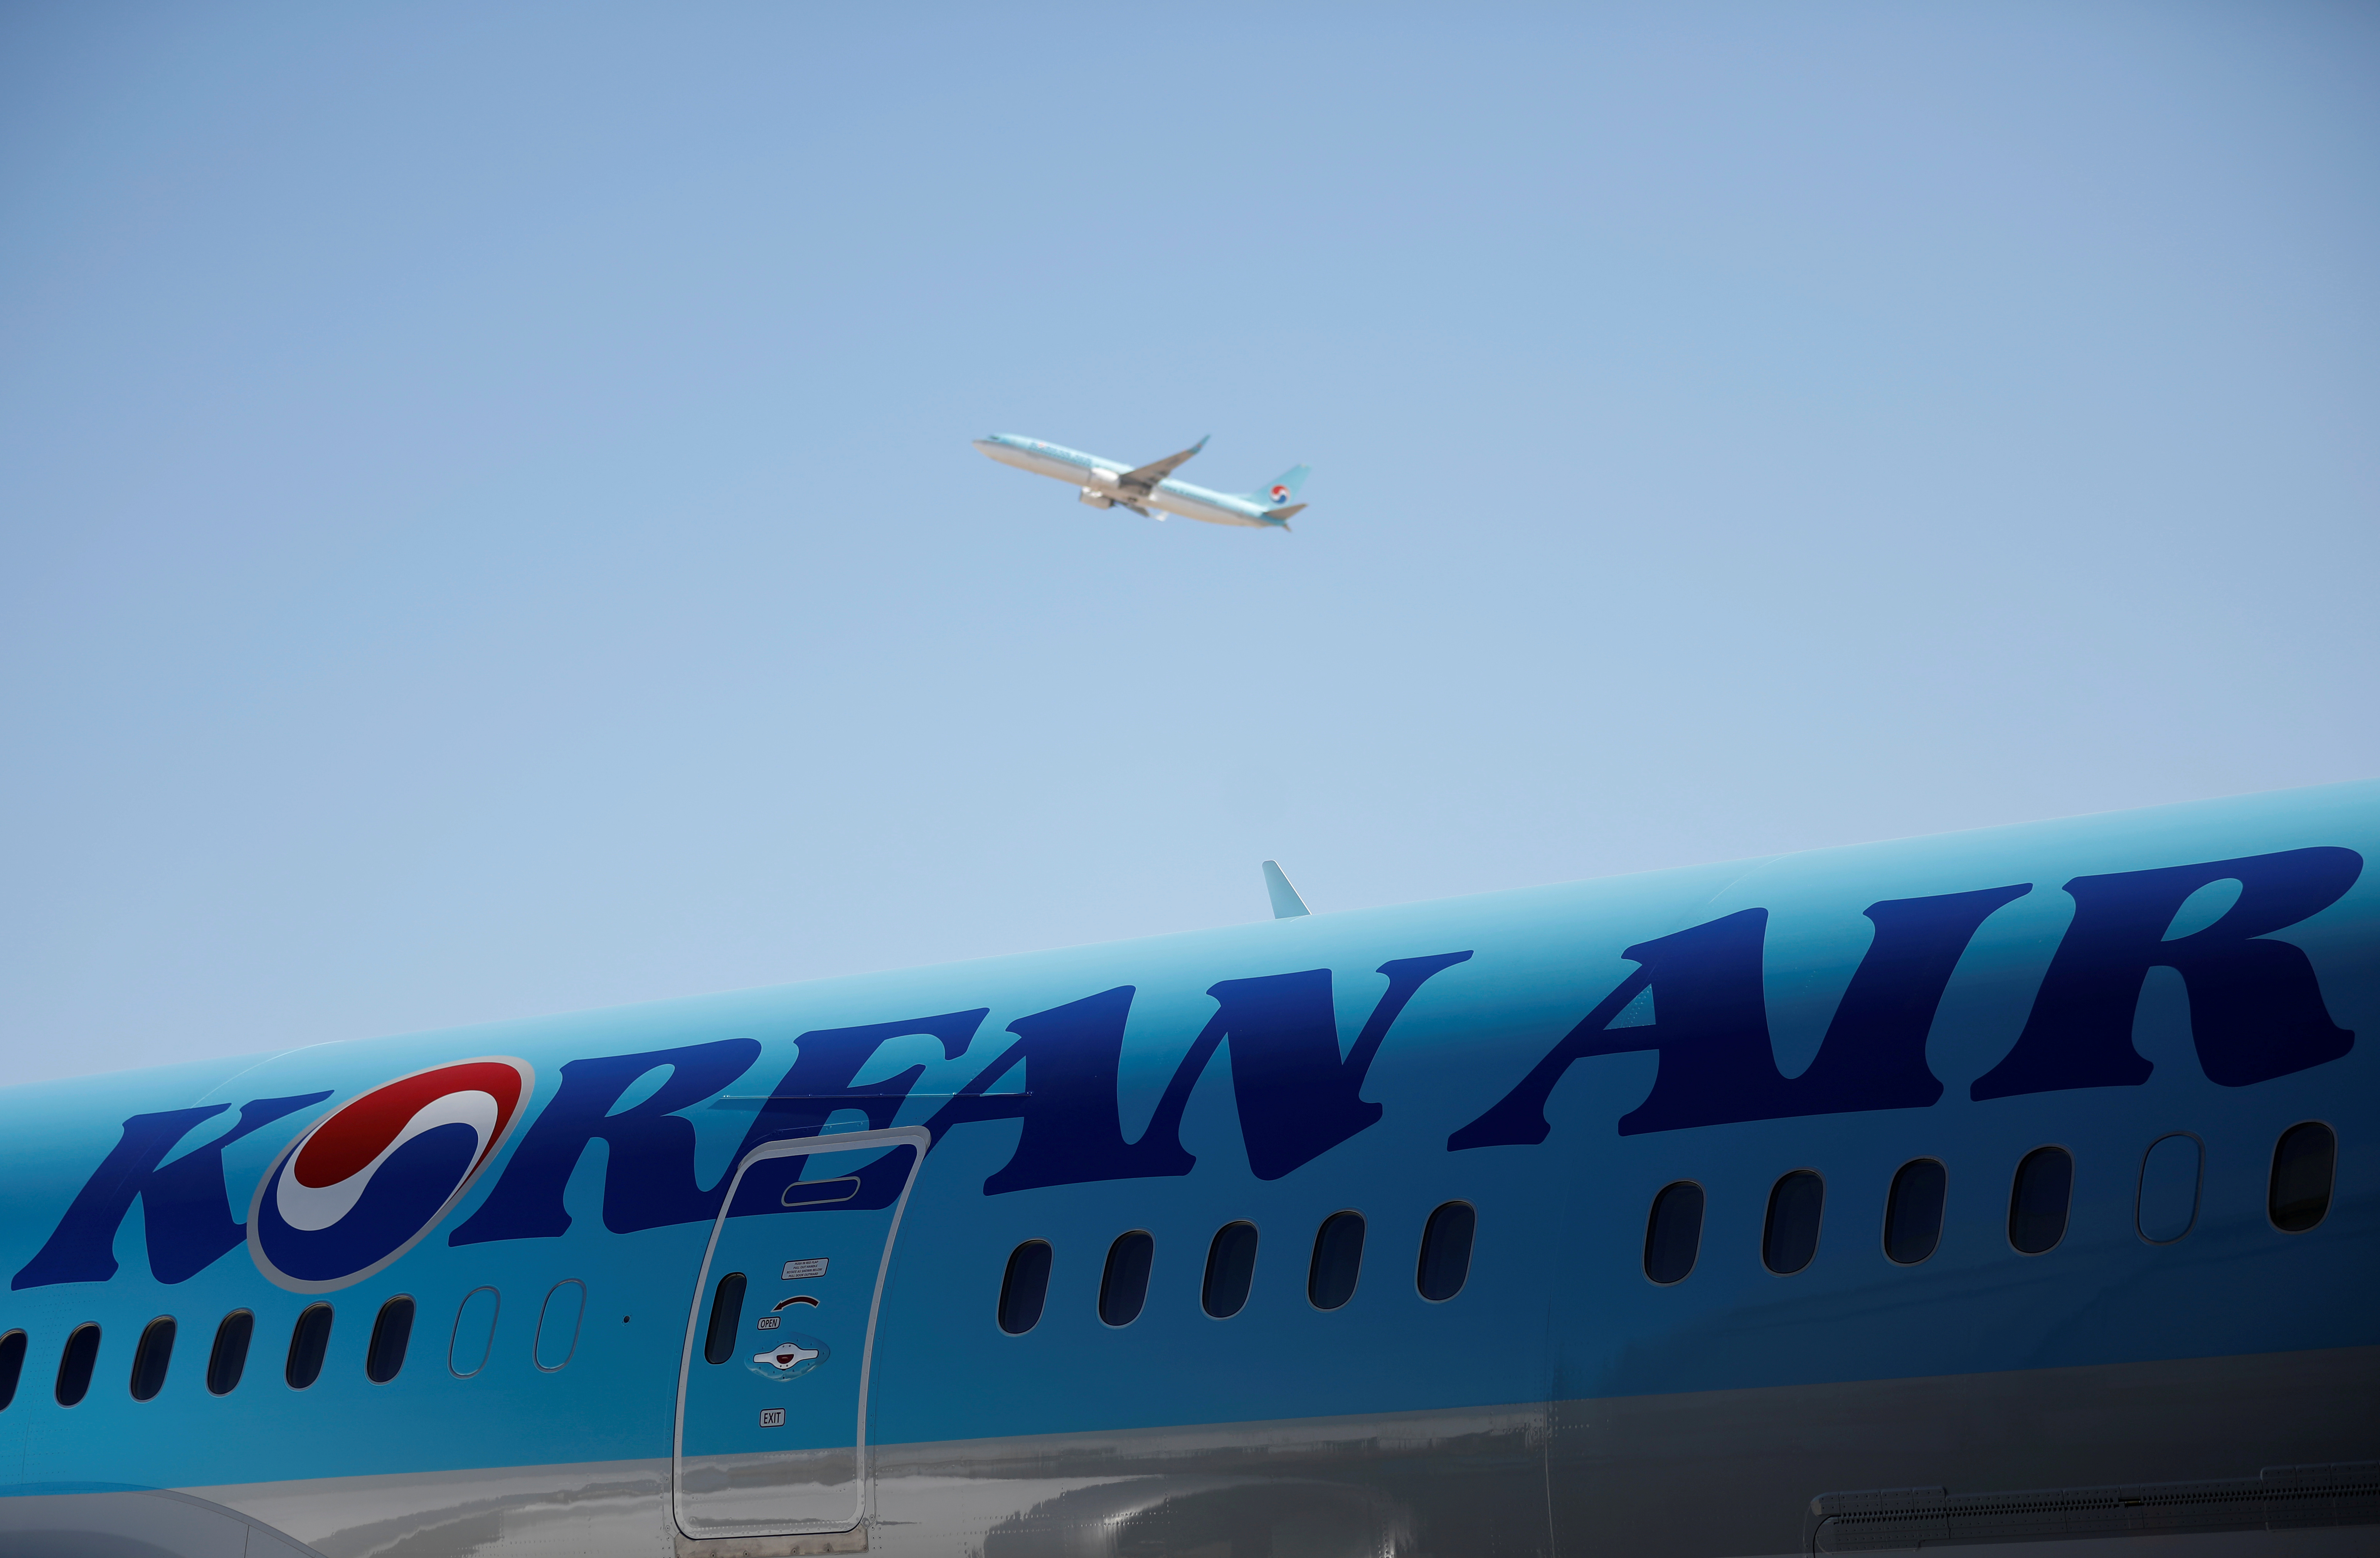 The logo of Korean Airlines is seen on a B787-9 plane at its aviation shed in Incheon, South Korea